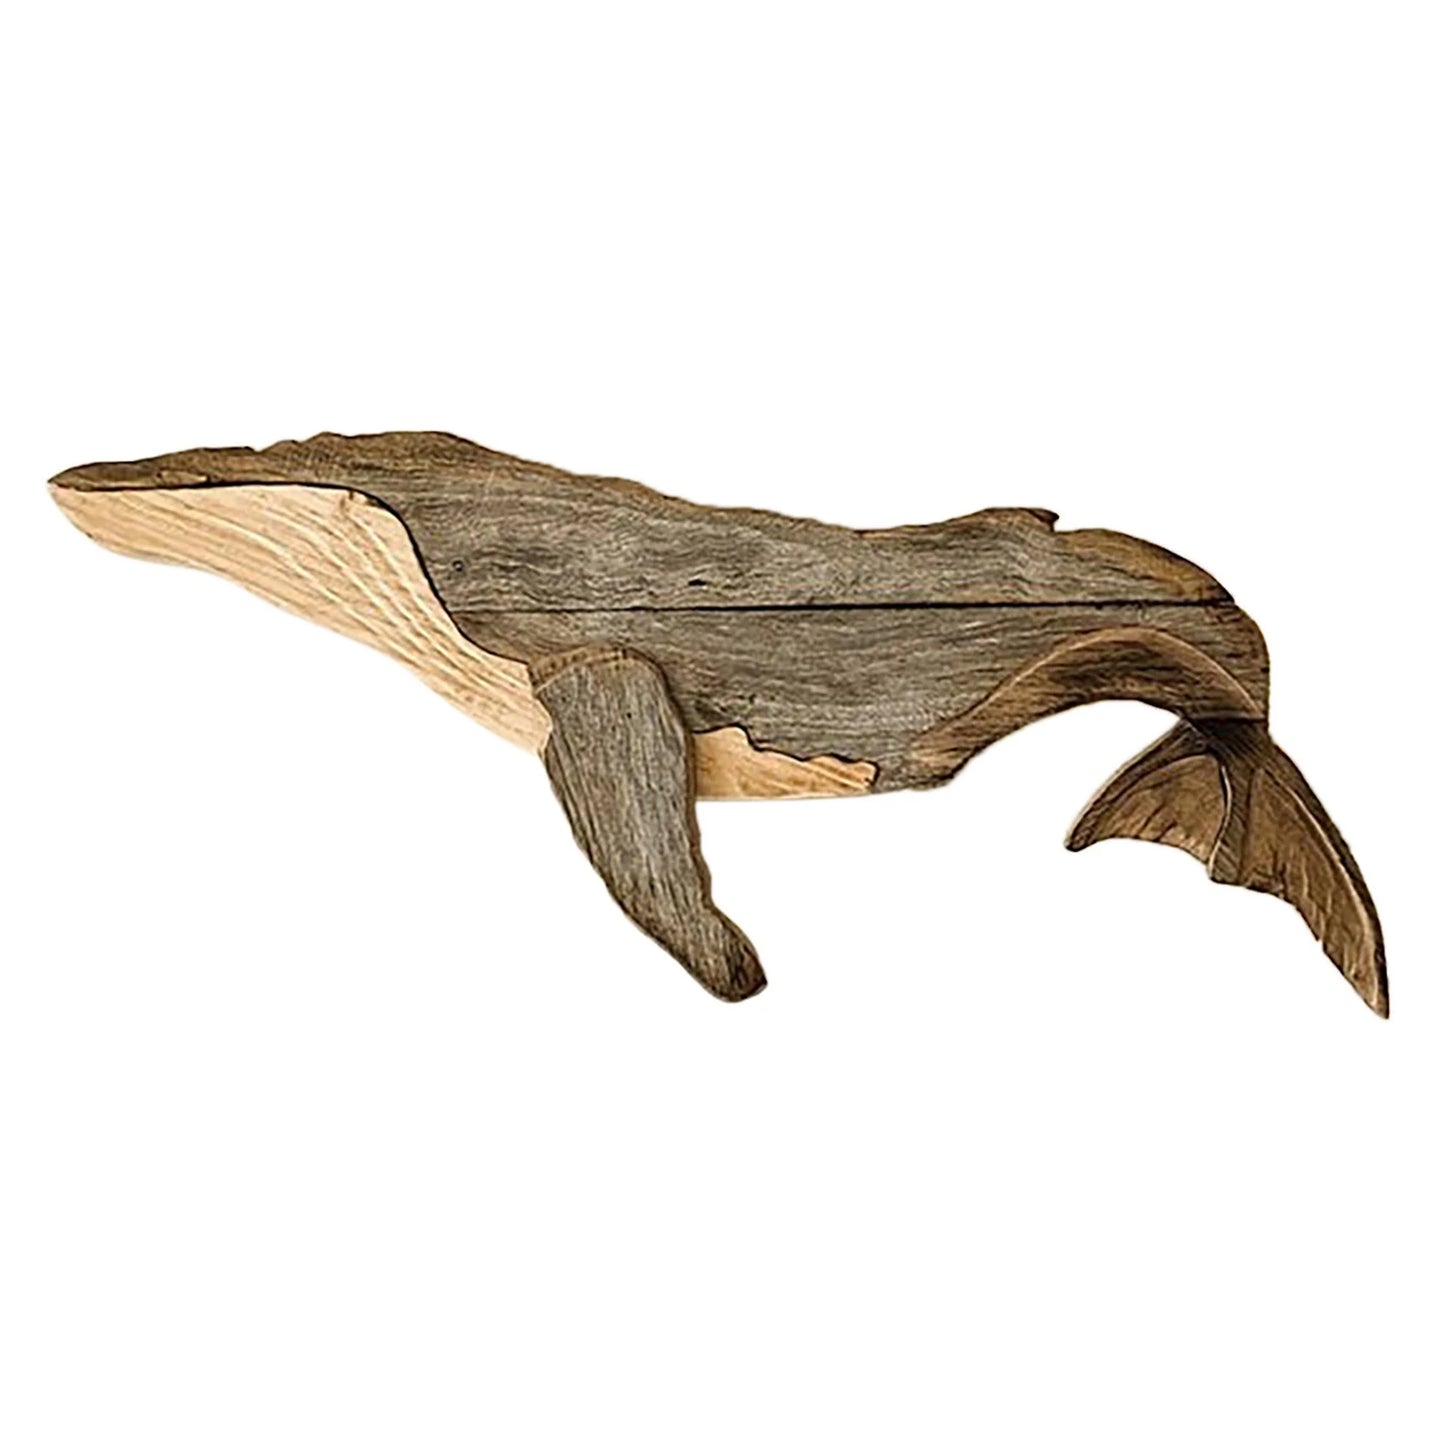 Marine Elements Whale Home Wall Decor Wooden Wall Hanging Whale Ornaments for Living Room Bedroom Fishes Decorations